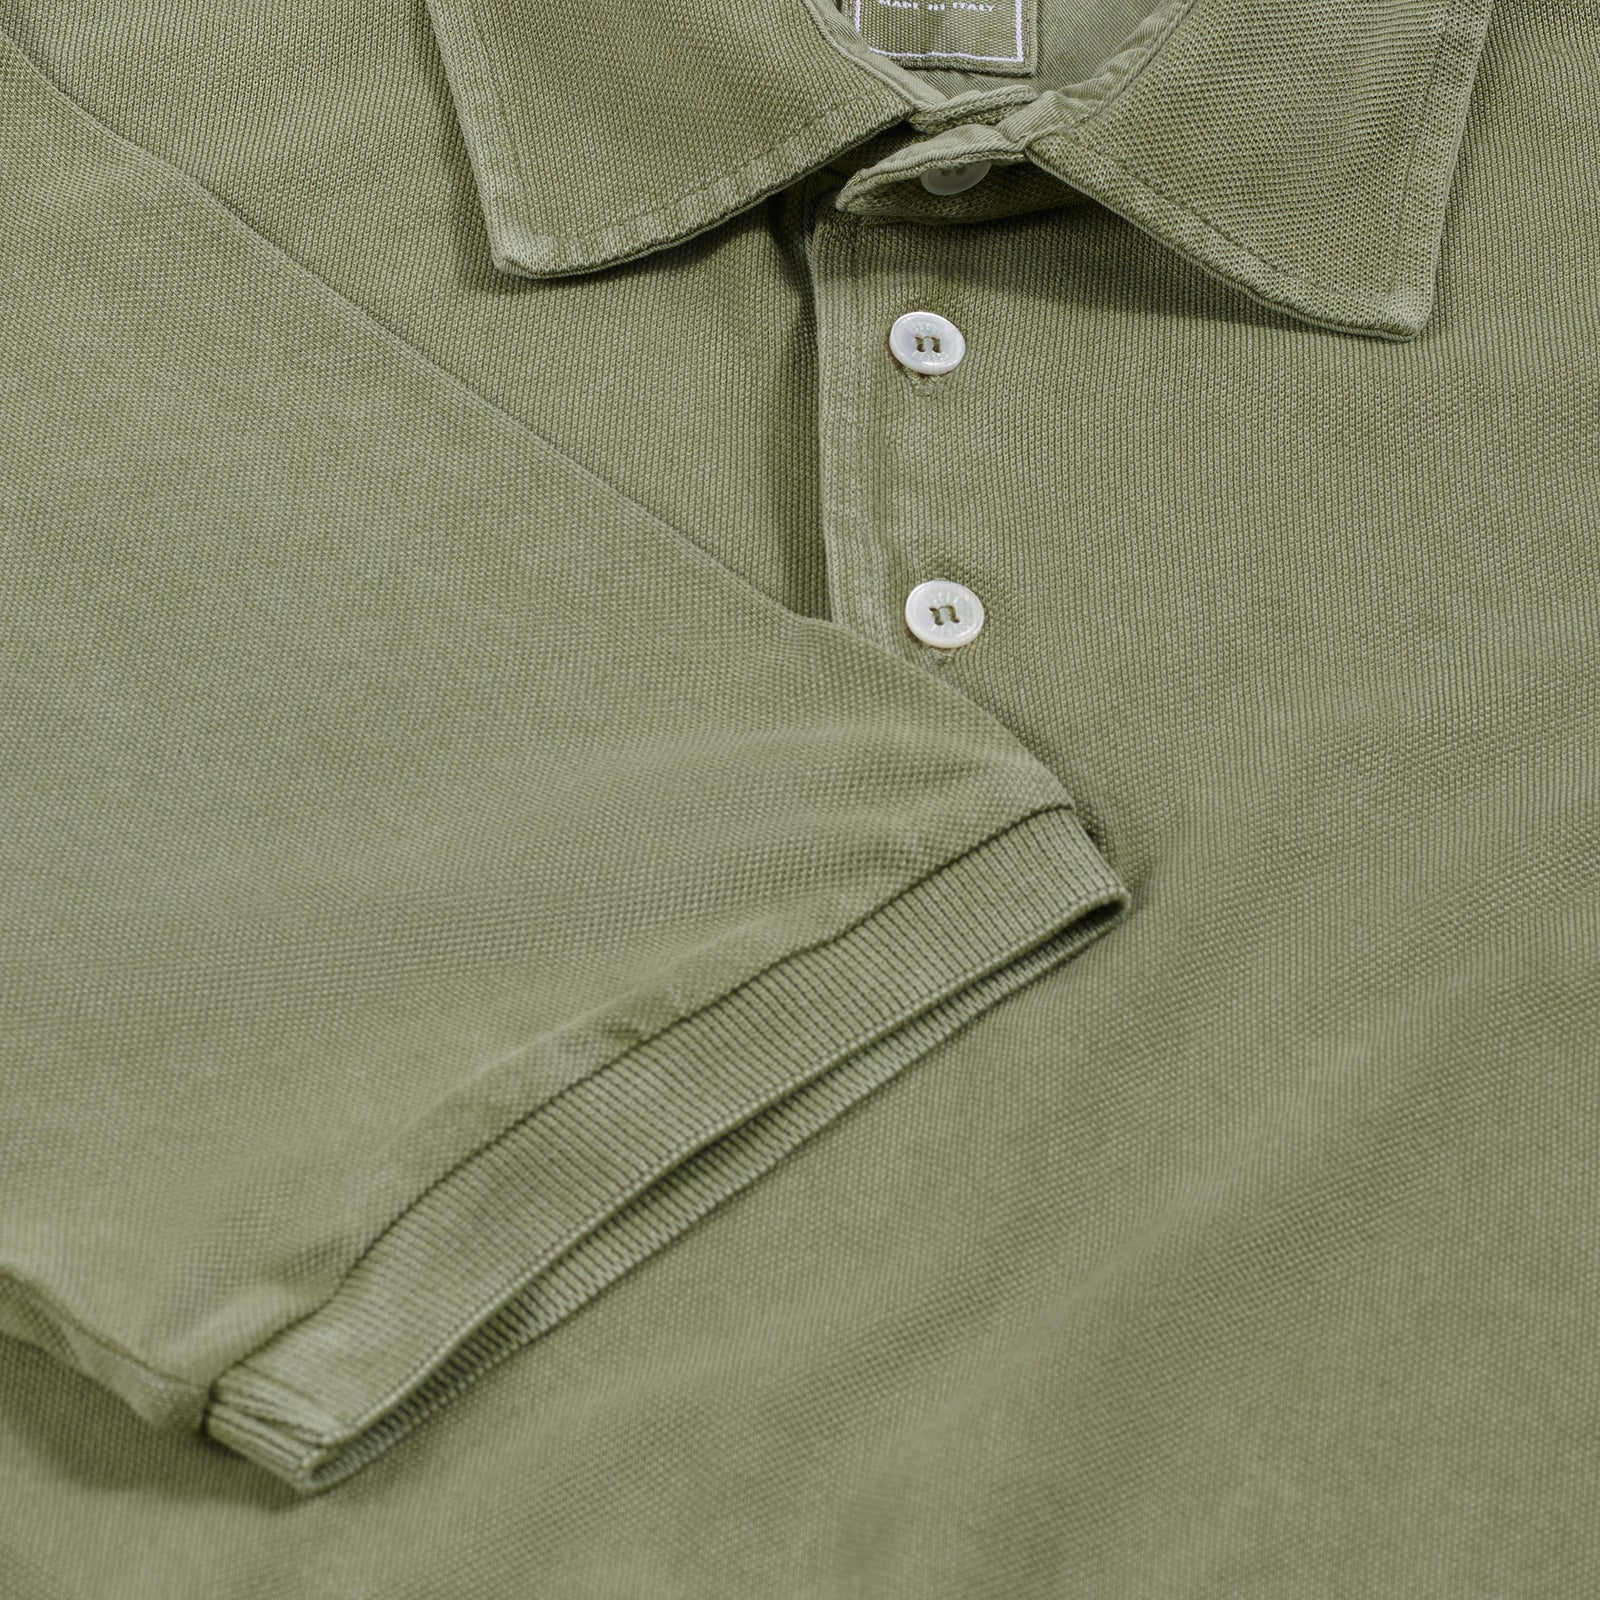 Fedeli Classic Short Sleeve Knitted Piqué Polo Shirt in Olive Green